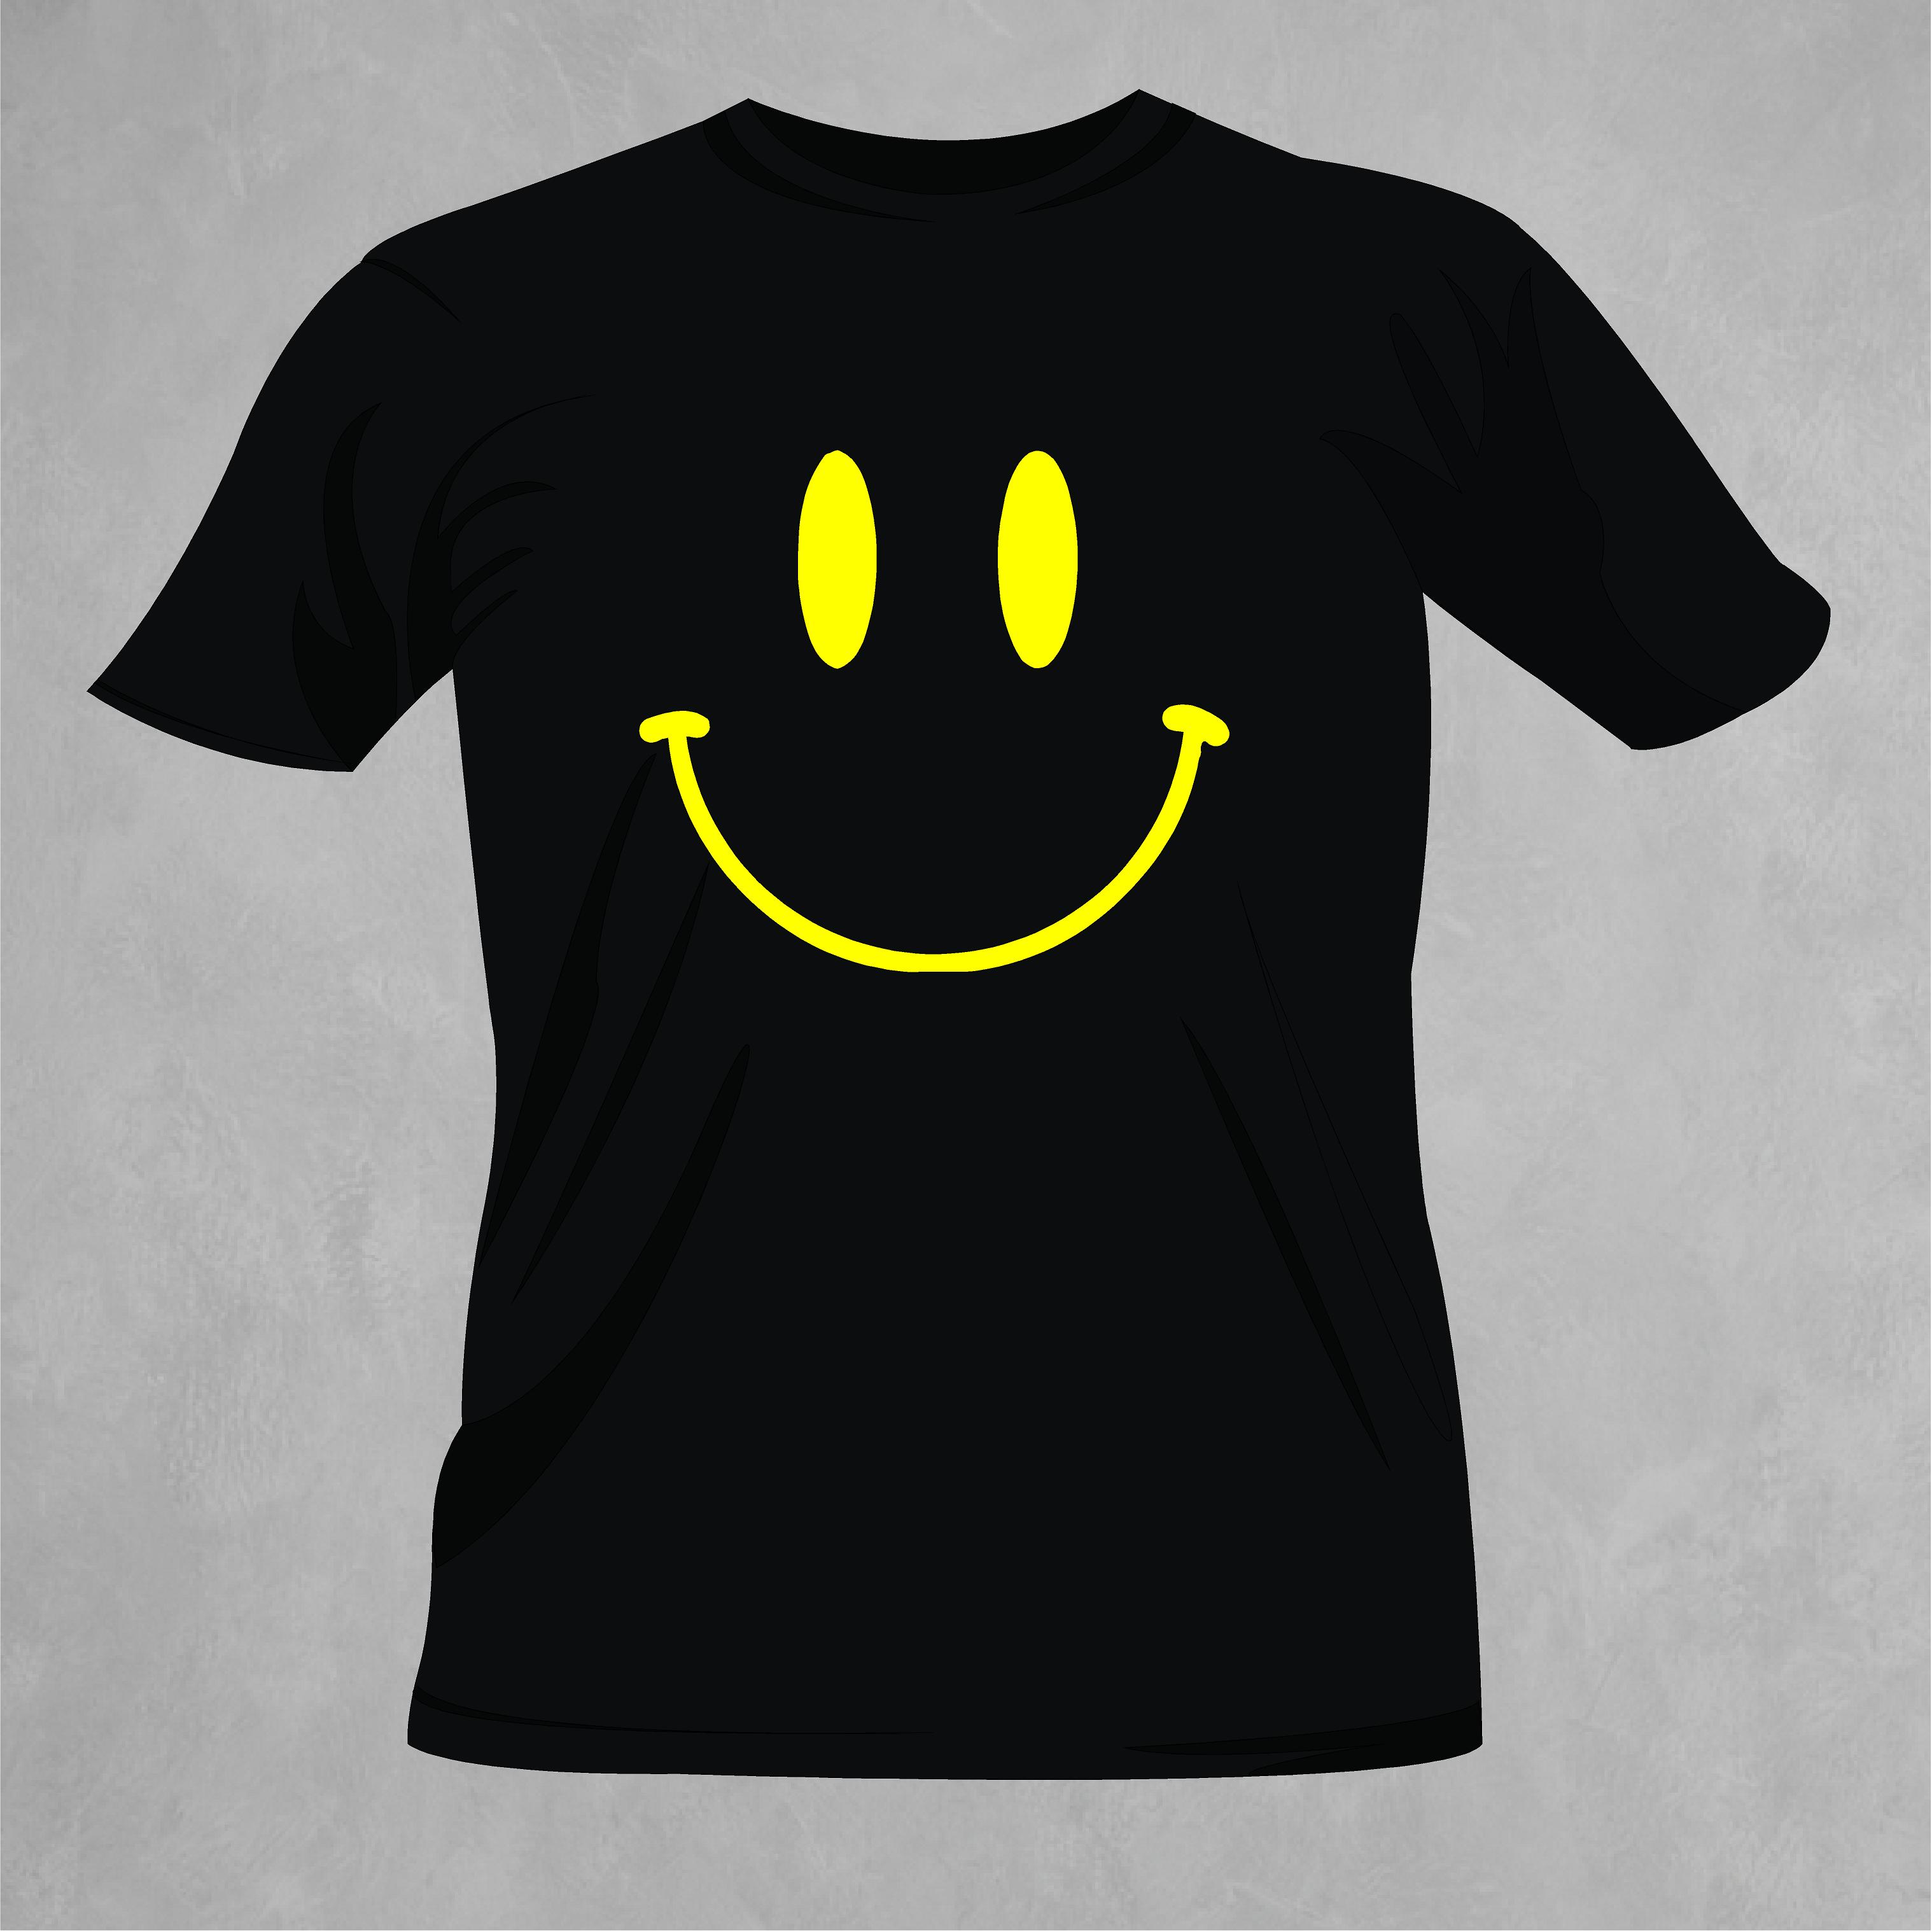 Smiley face T shirt 2